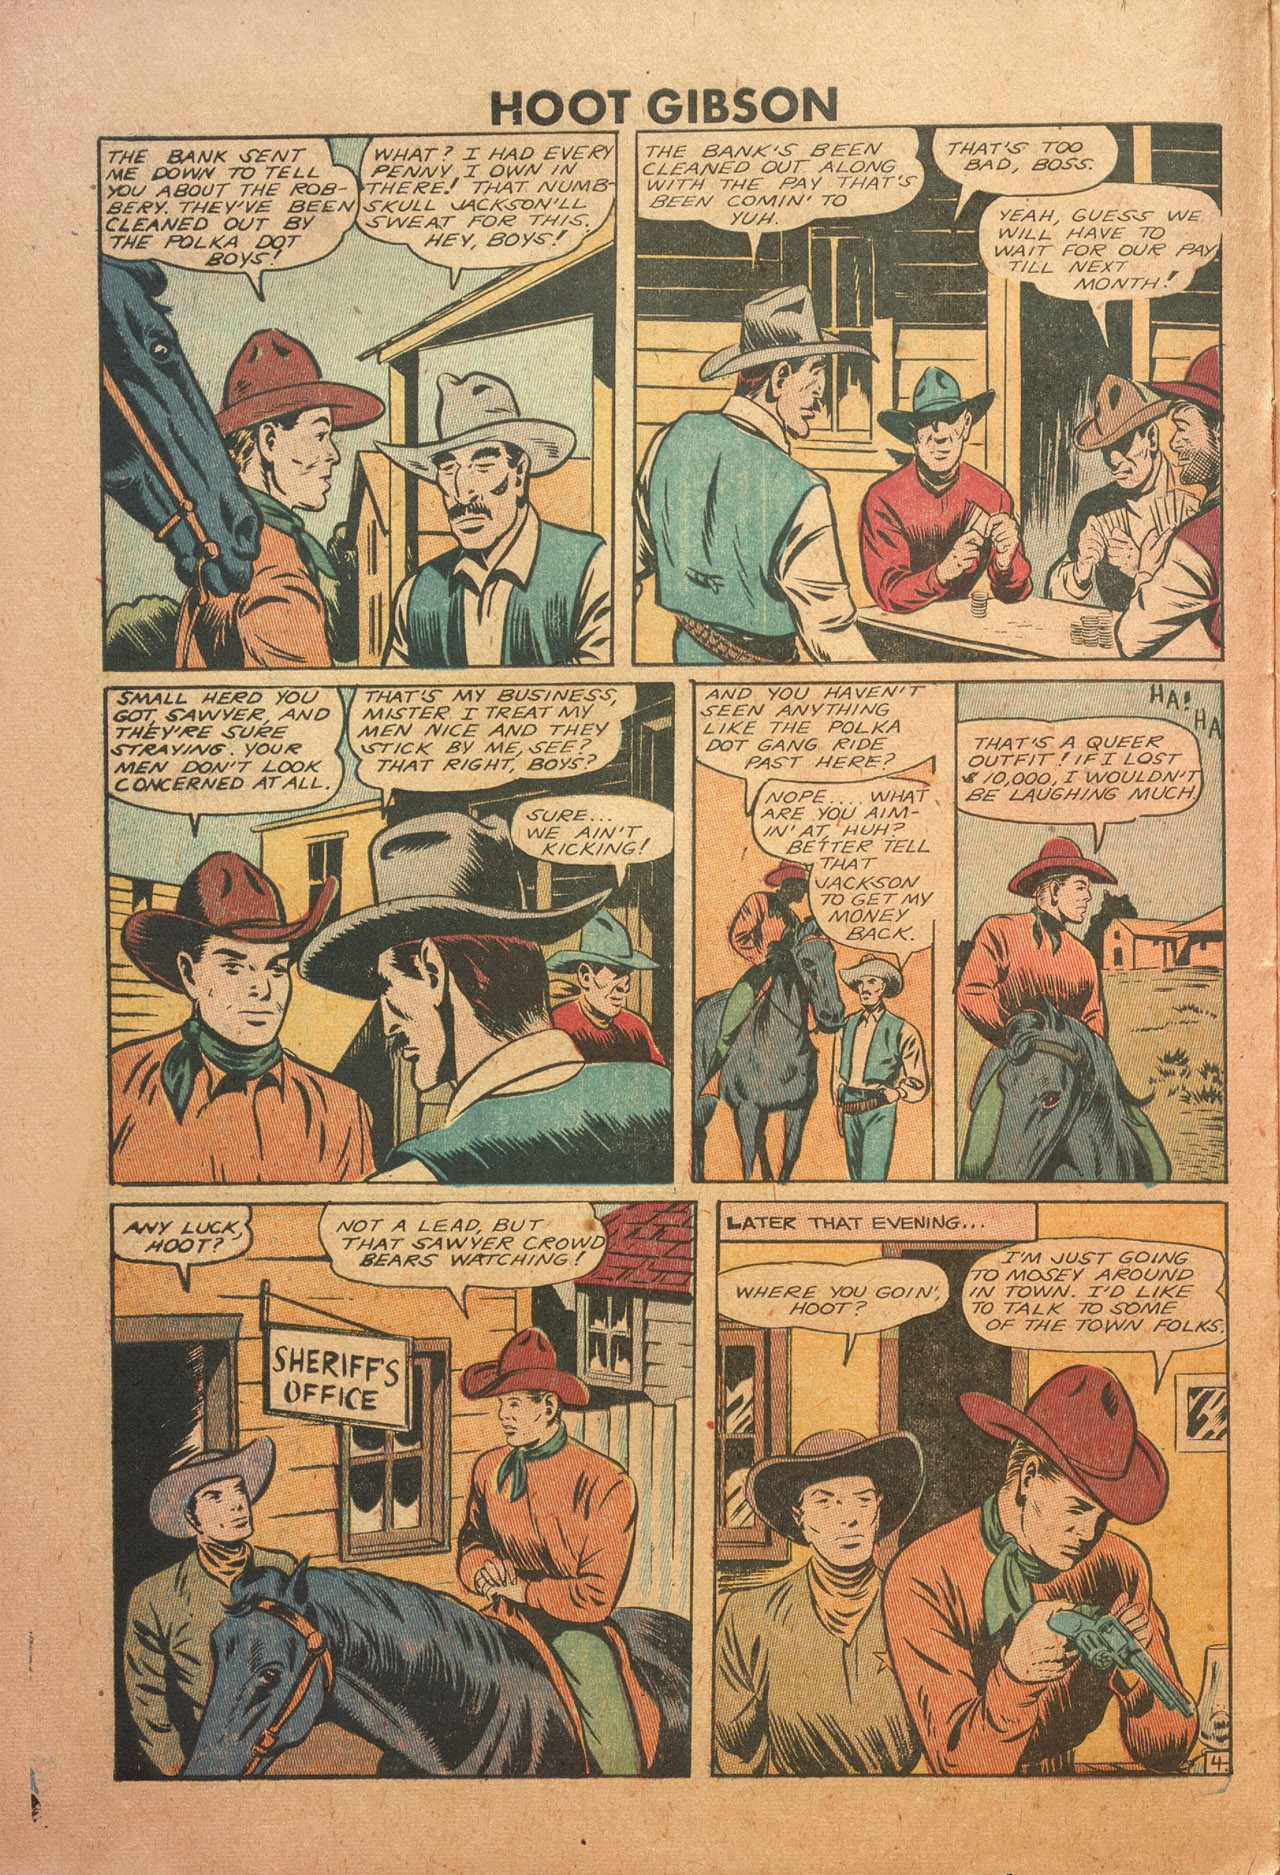 Read online Hoot Gibson comic -  Issue #1 - 10